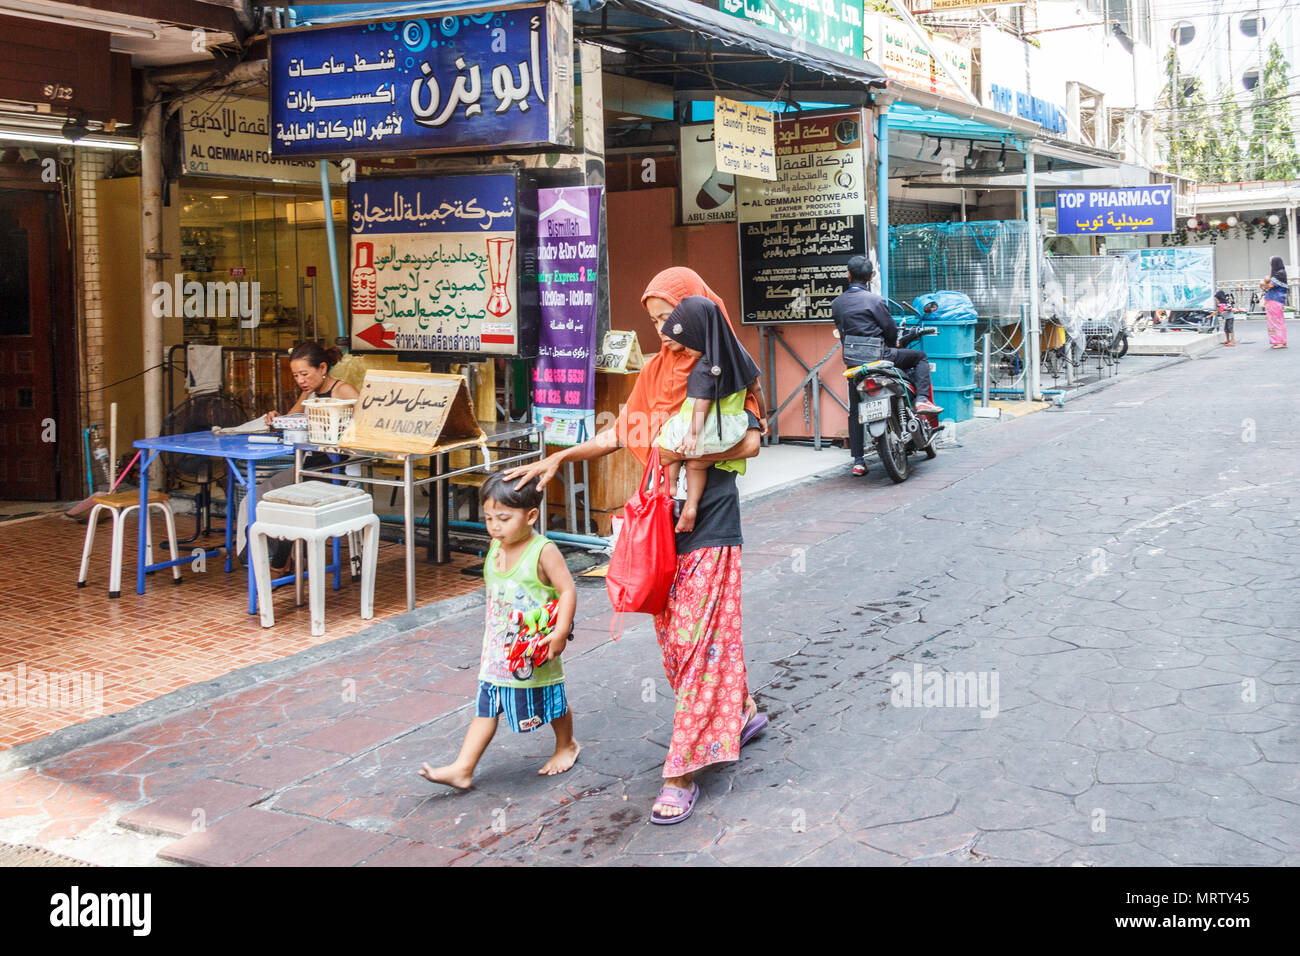 Bangkok, Thailand-25th March 2017: Middle eastern woman with children walking down Sukhumvit soi 3. The area is known as the Arab Soi. Stock Photo